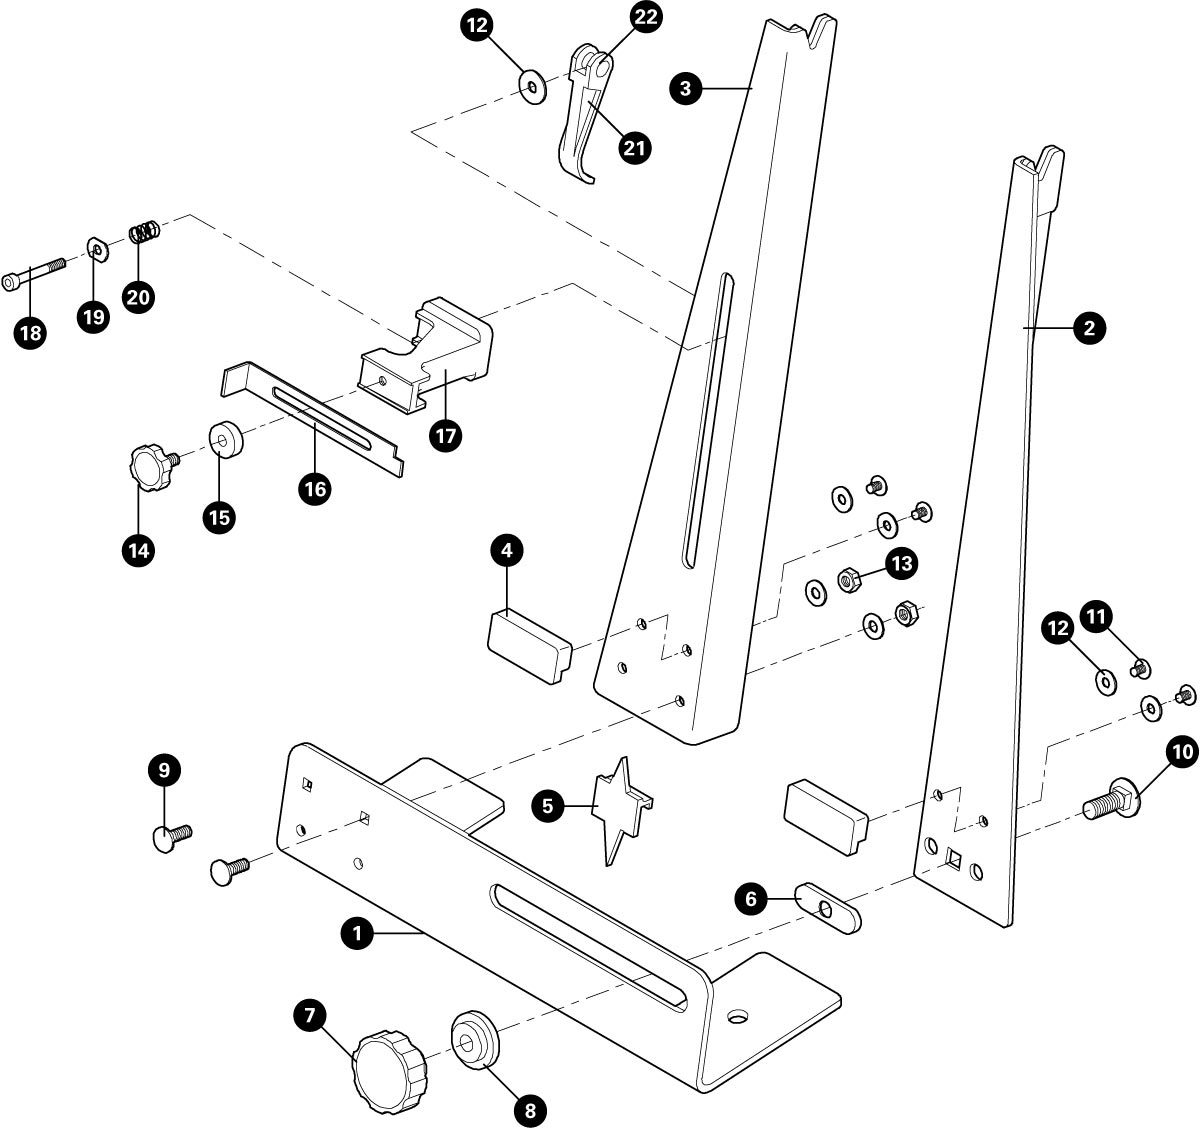 Parts diagram for TS-7 Home Mechanic Wheel Truing Stand, enlarged